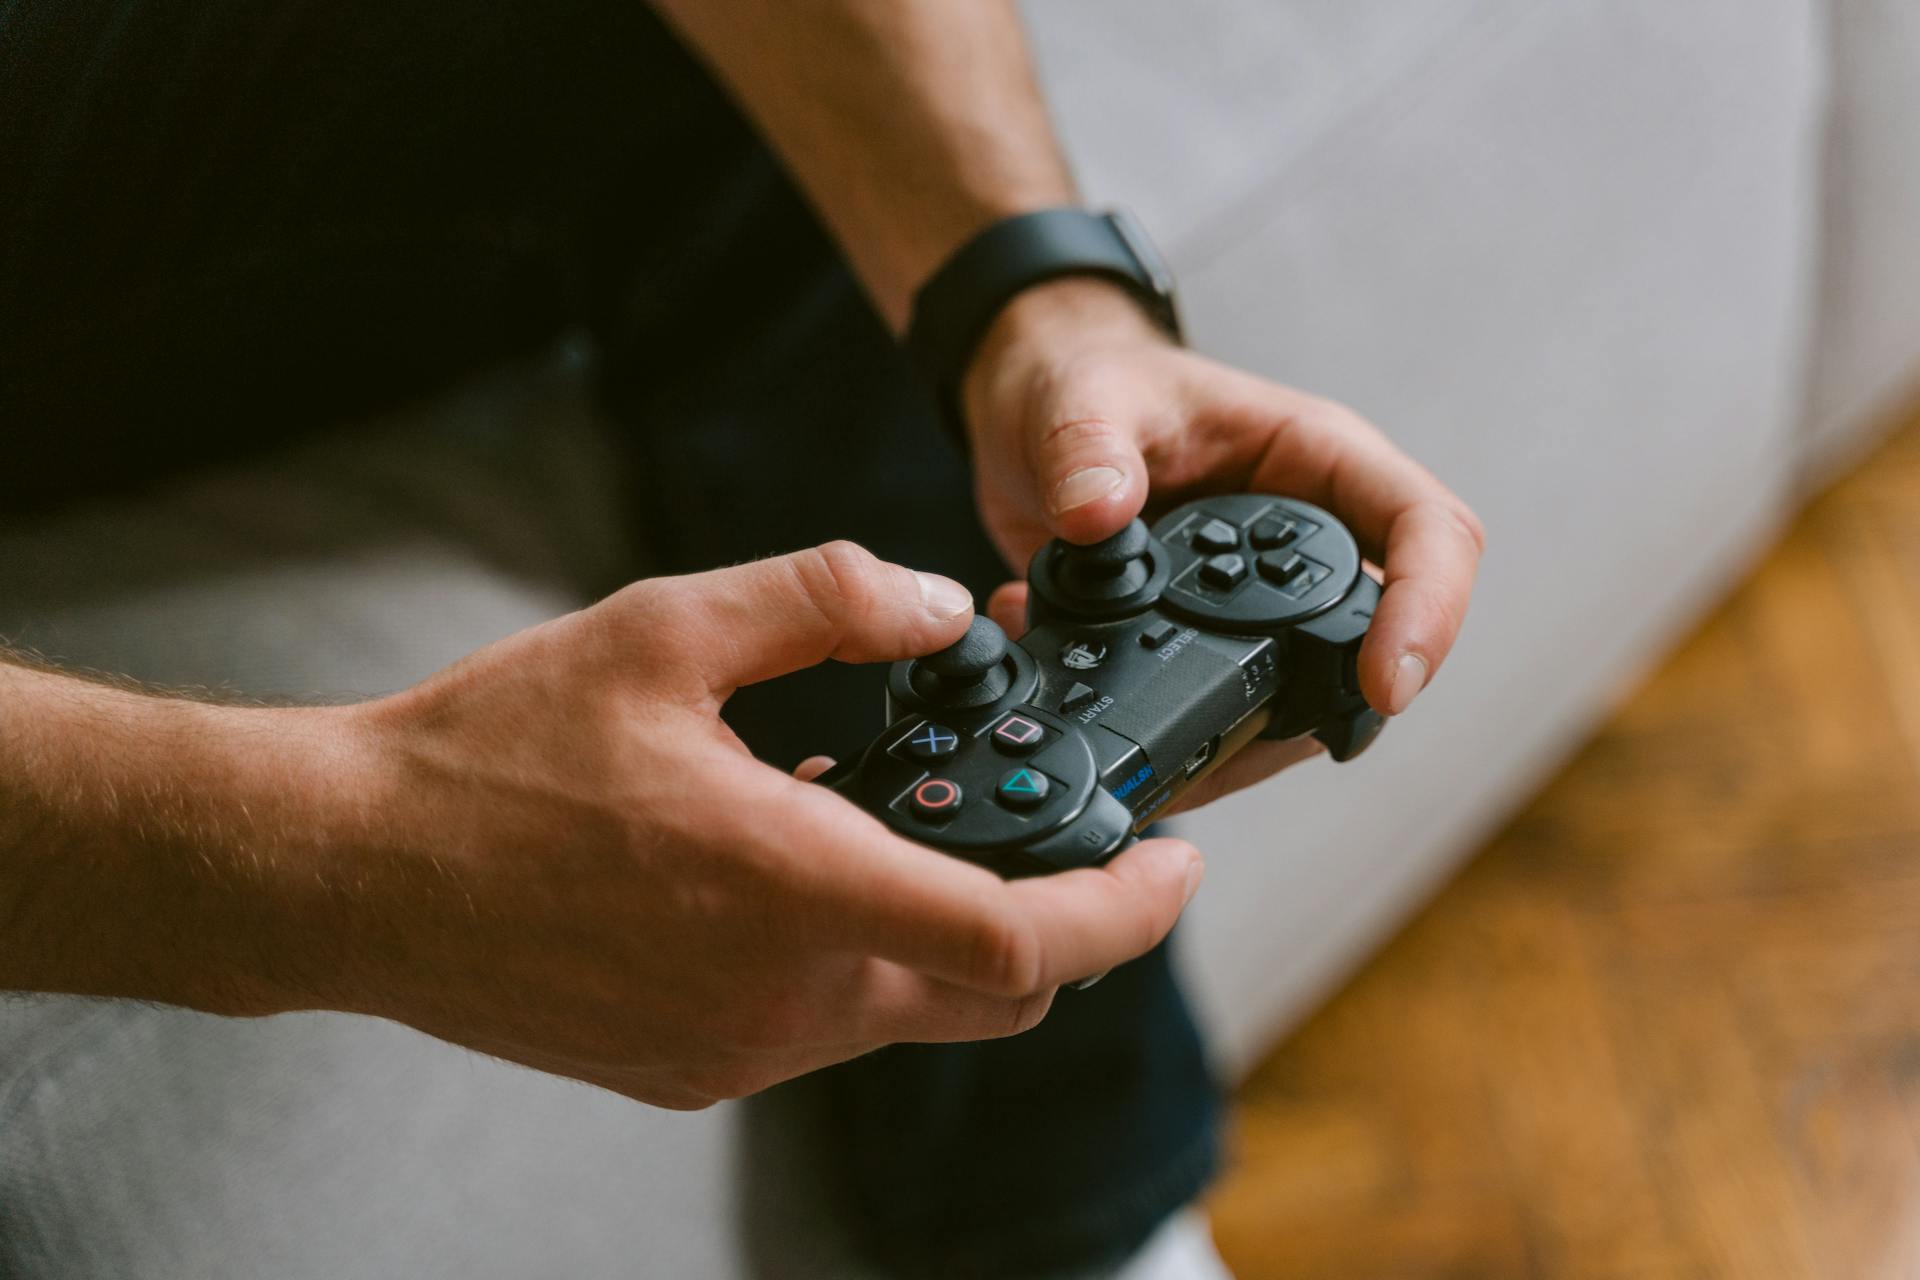 Man holding a game console | Source: Pexels